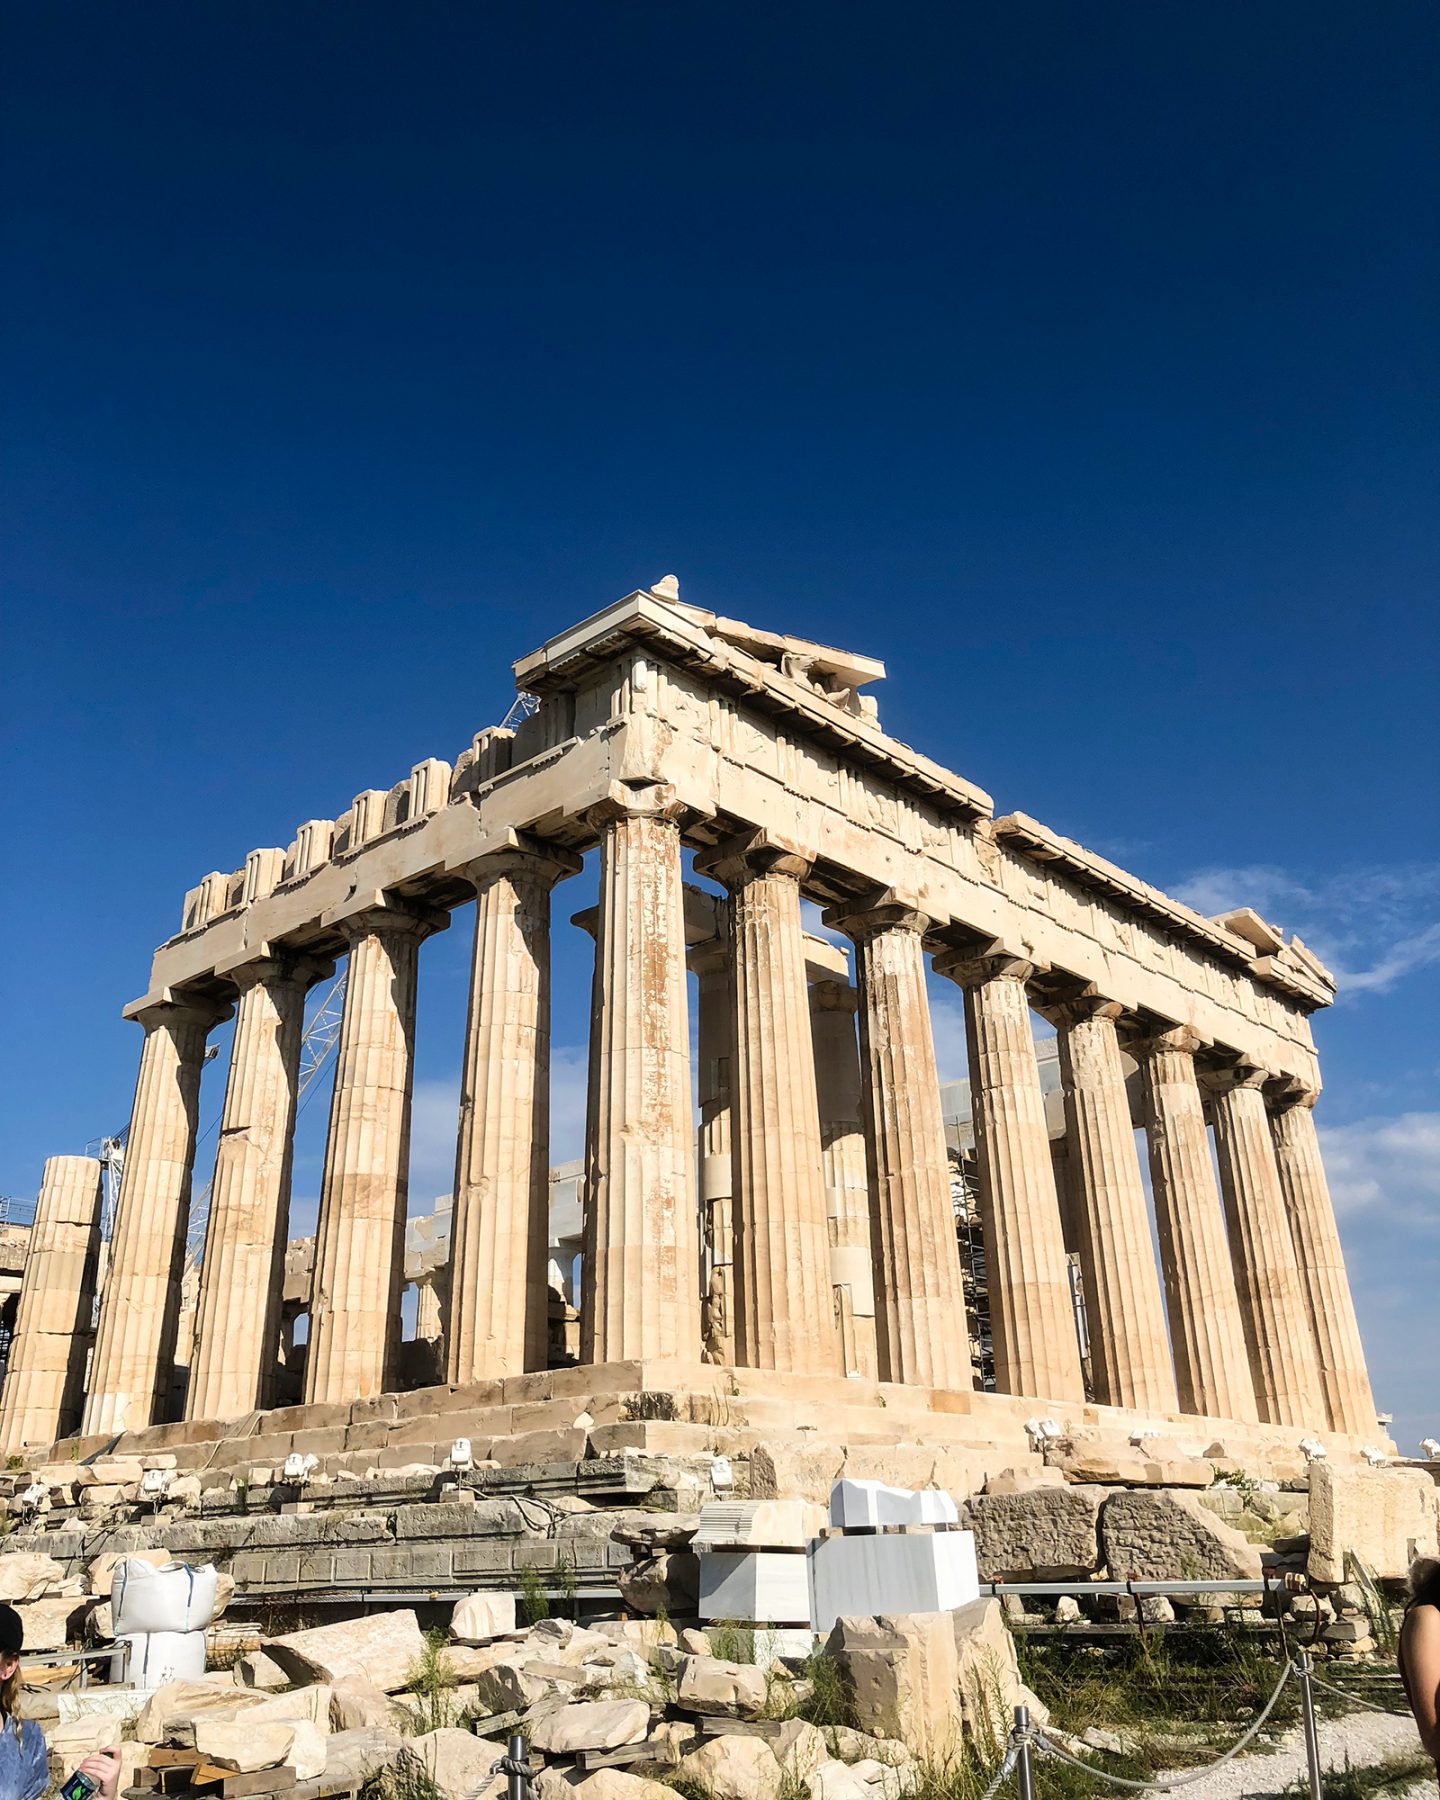 GREECE GUIDE: SOME OF THE BEST THINGS TO DO IN ATHENS